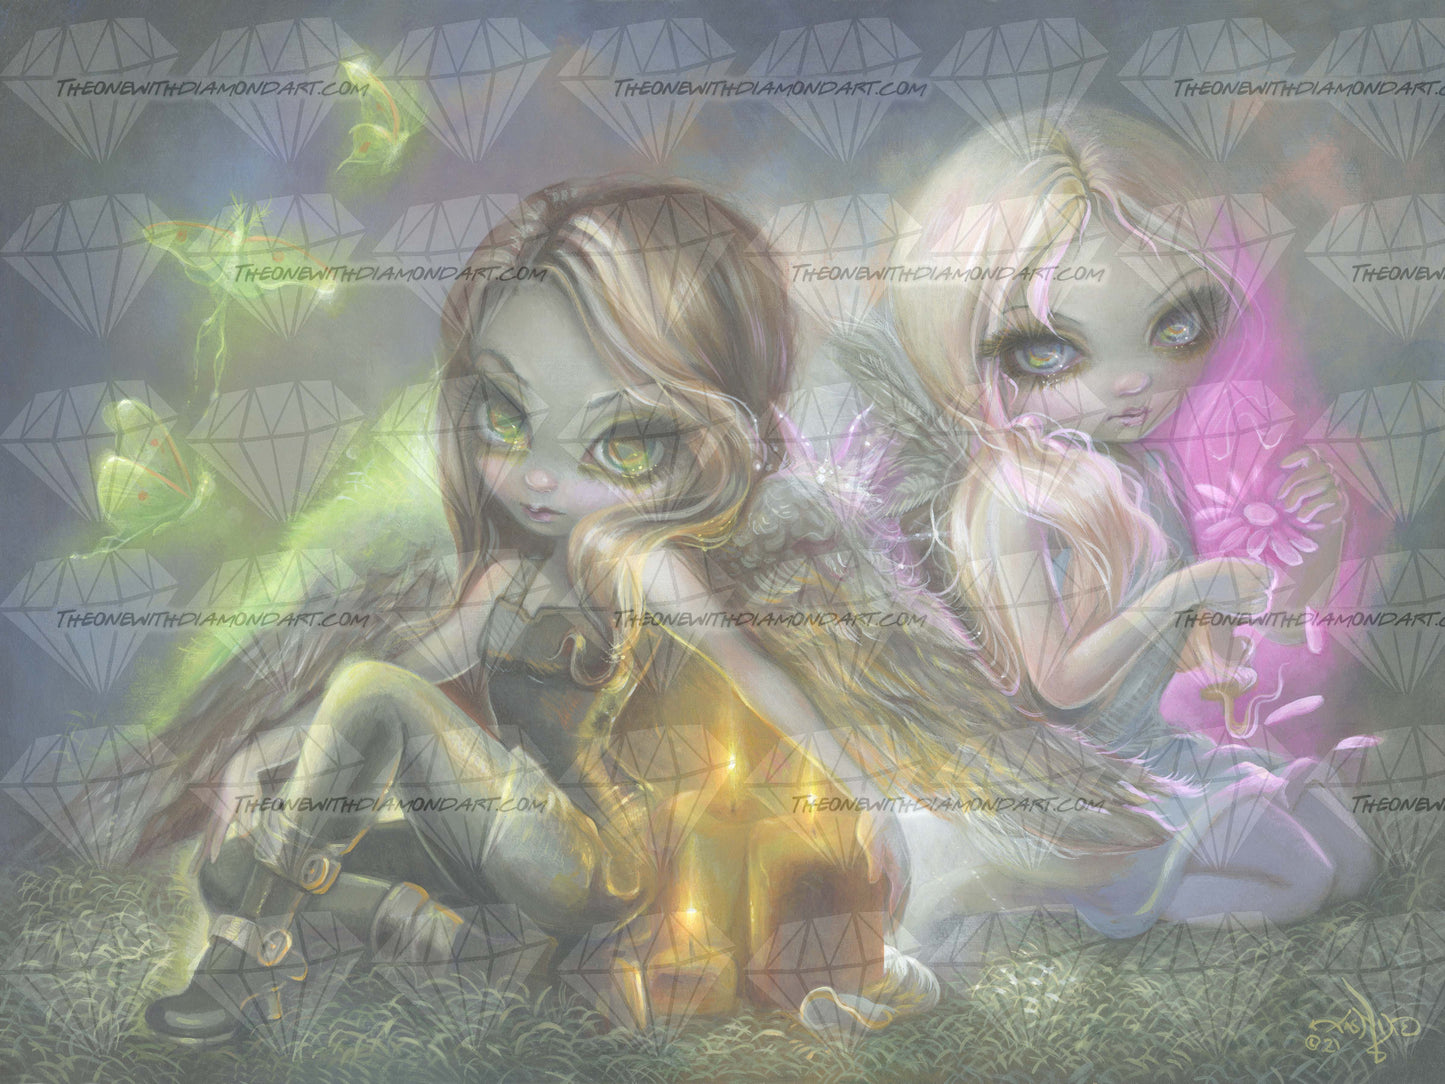 Bright Candles Burn Fast ©Jasmine Becket-Griffith